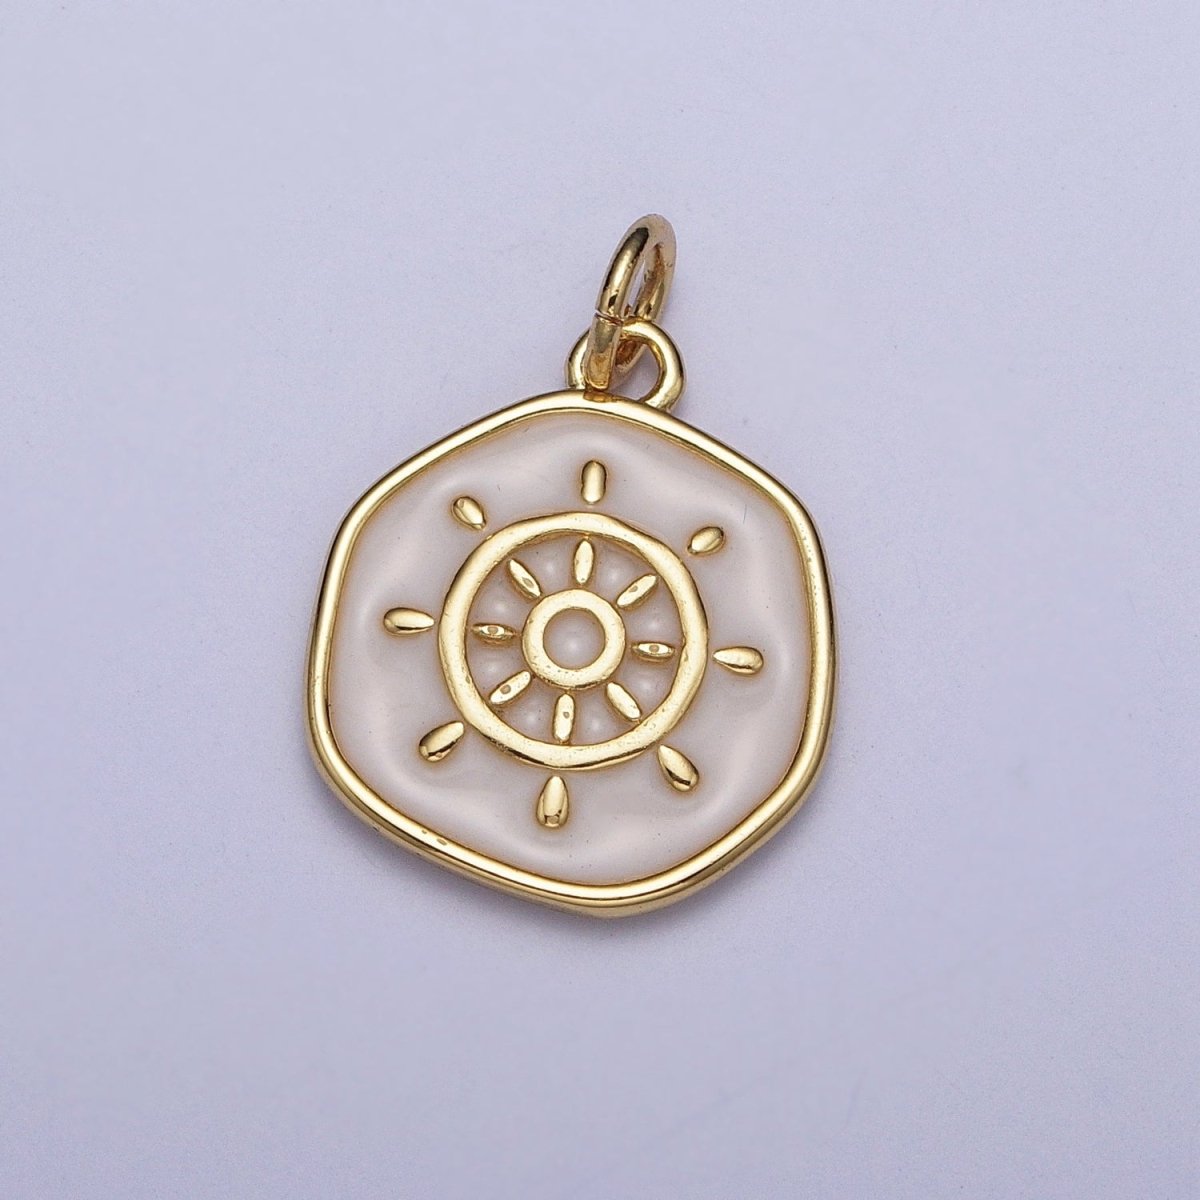 24K Gold Filled White Enamel Ship Boat Steering Wheel Round Coin Charm For Jewelry Making AG-135 - DLUXCA